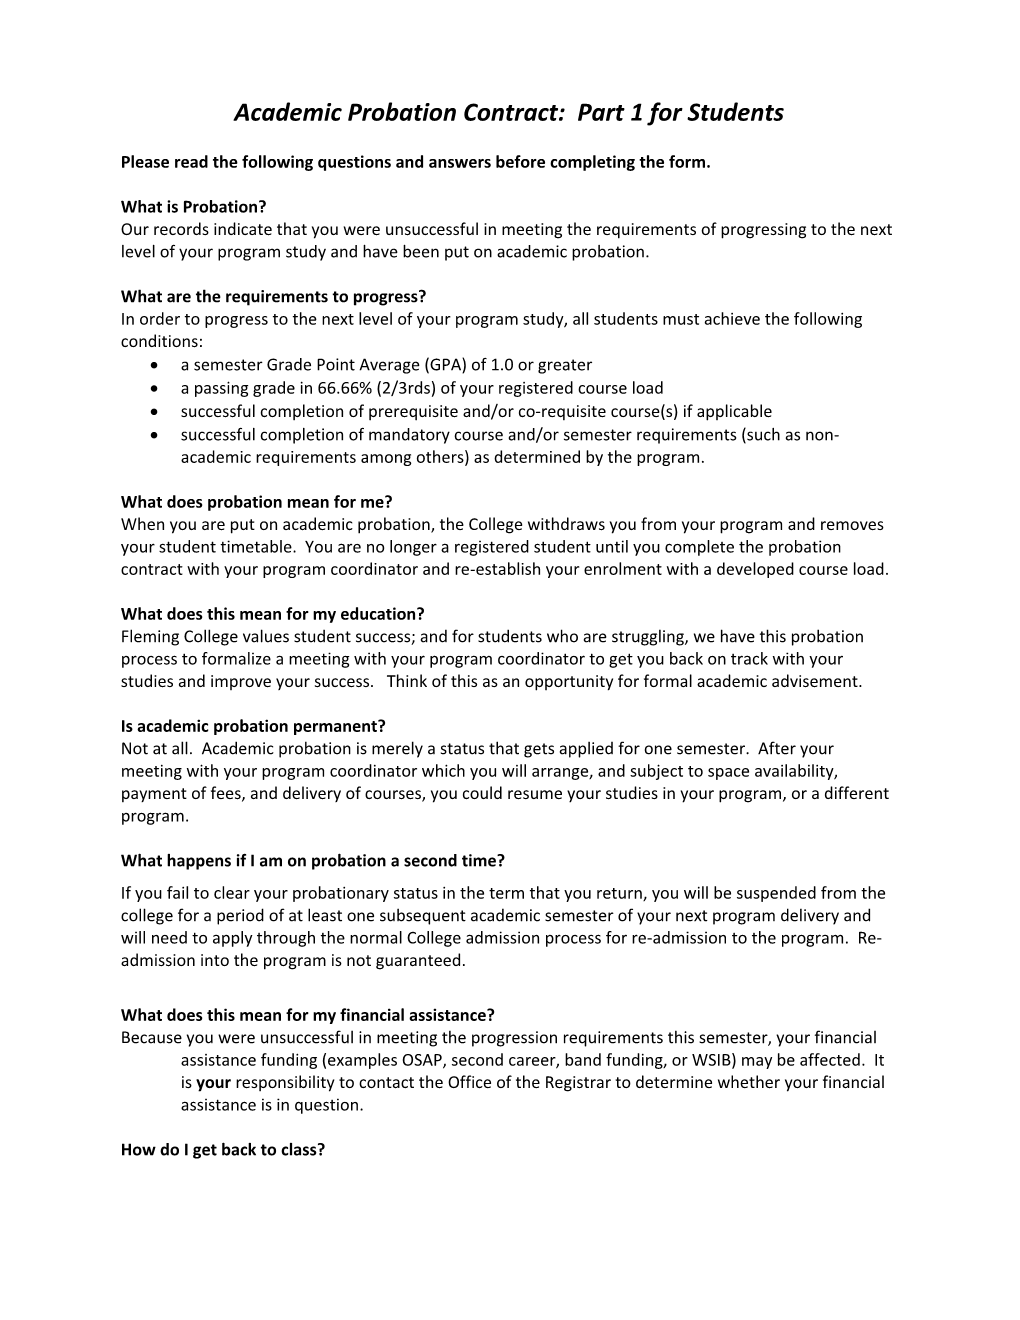 Academic Probation Contract: Part 1 for Students